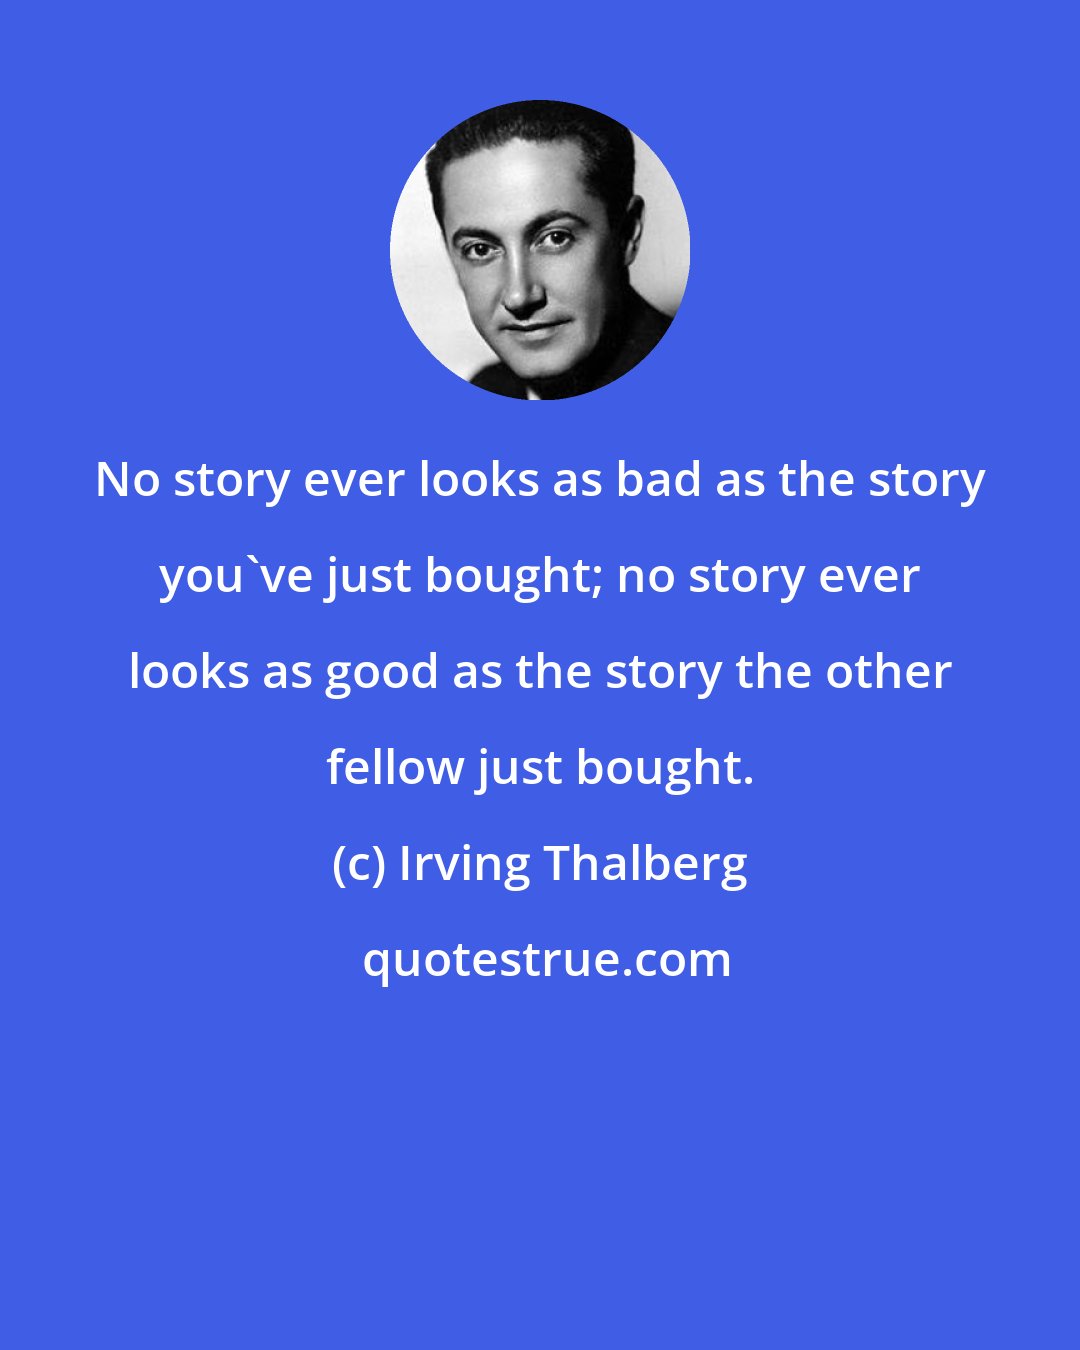 Irving Thalberg: No story ever looks as bad as the story you've just bought; no story ever looks as good as the story the other fellow just bought.